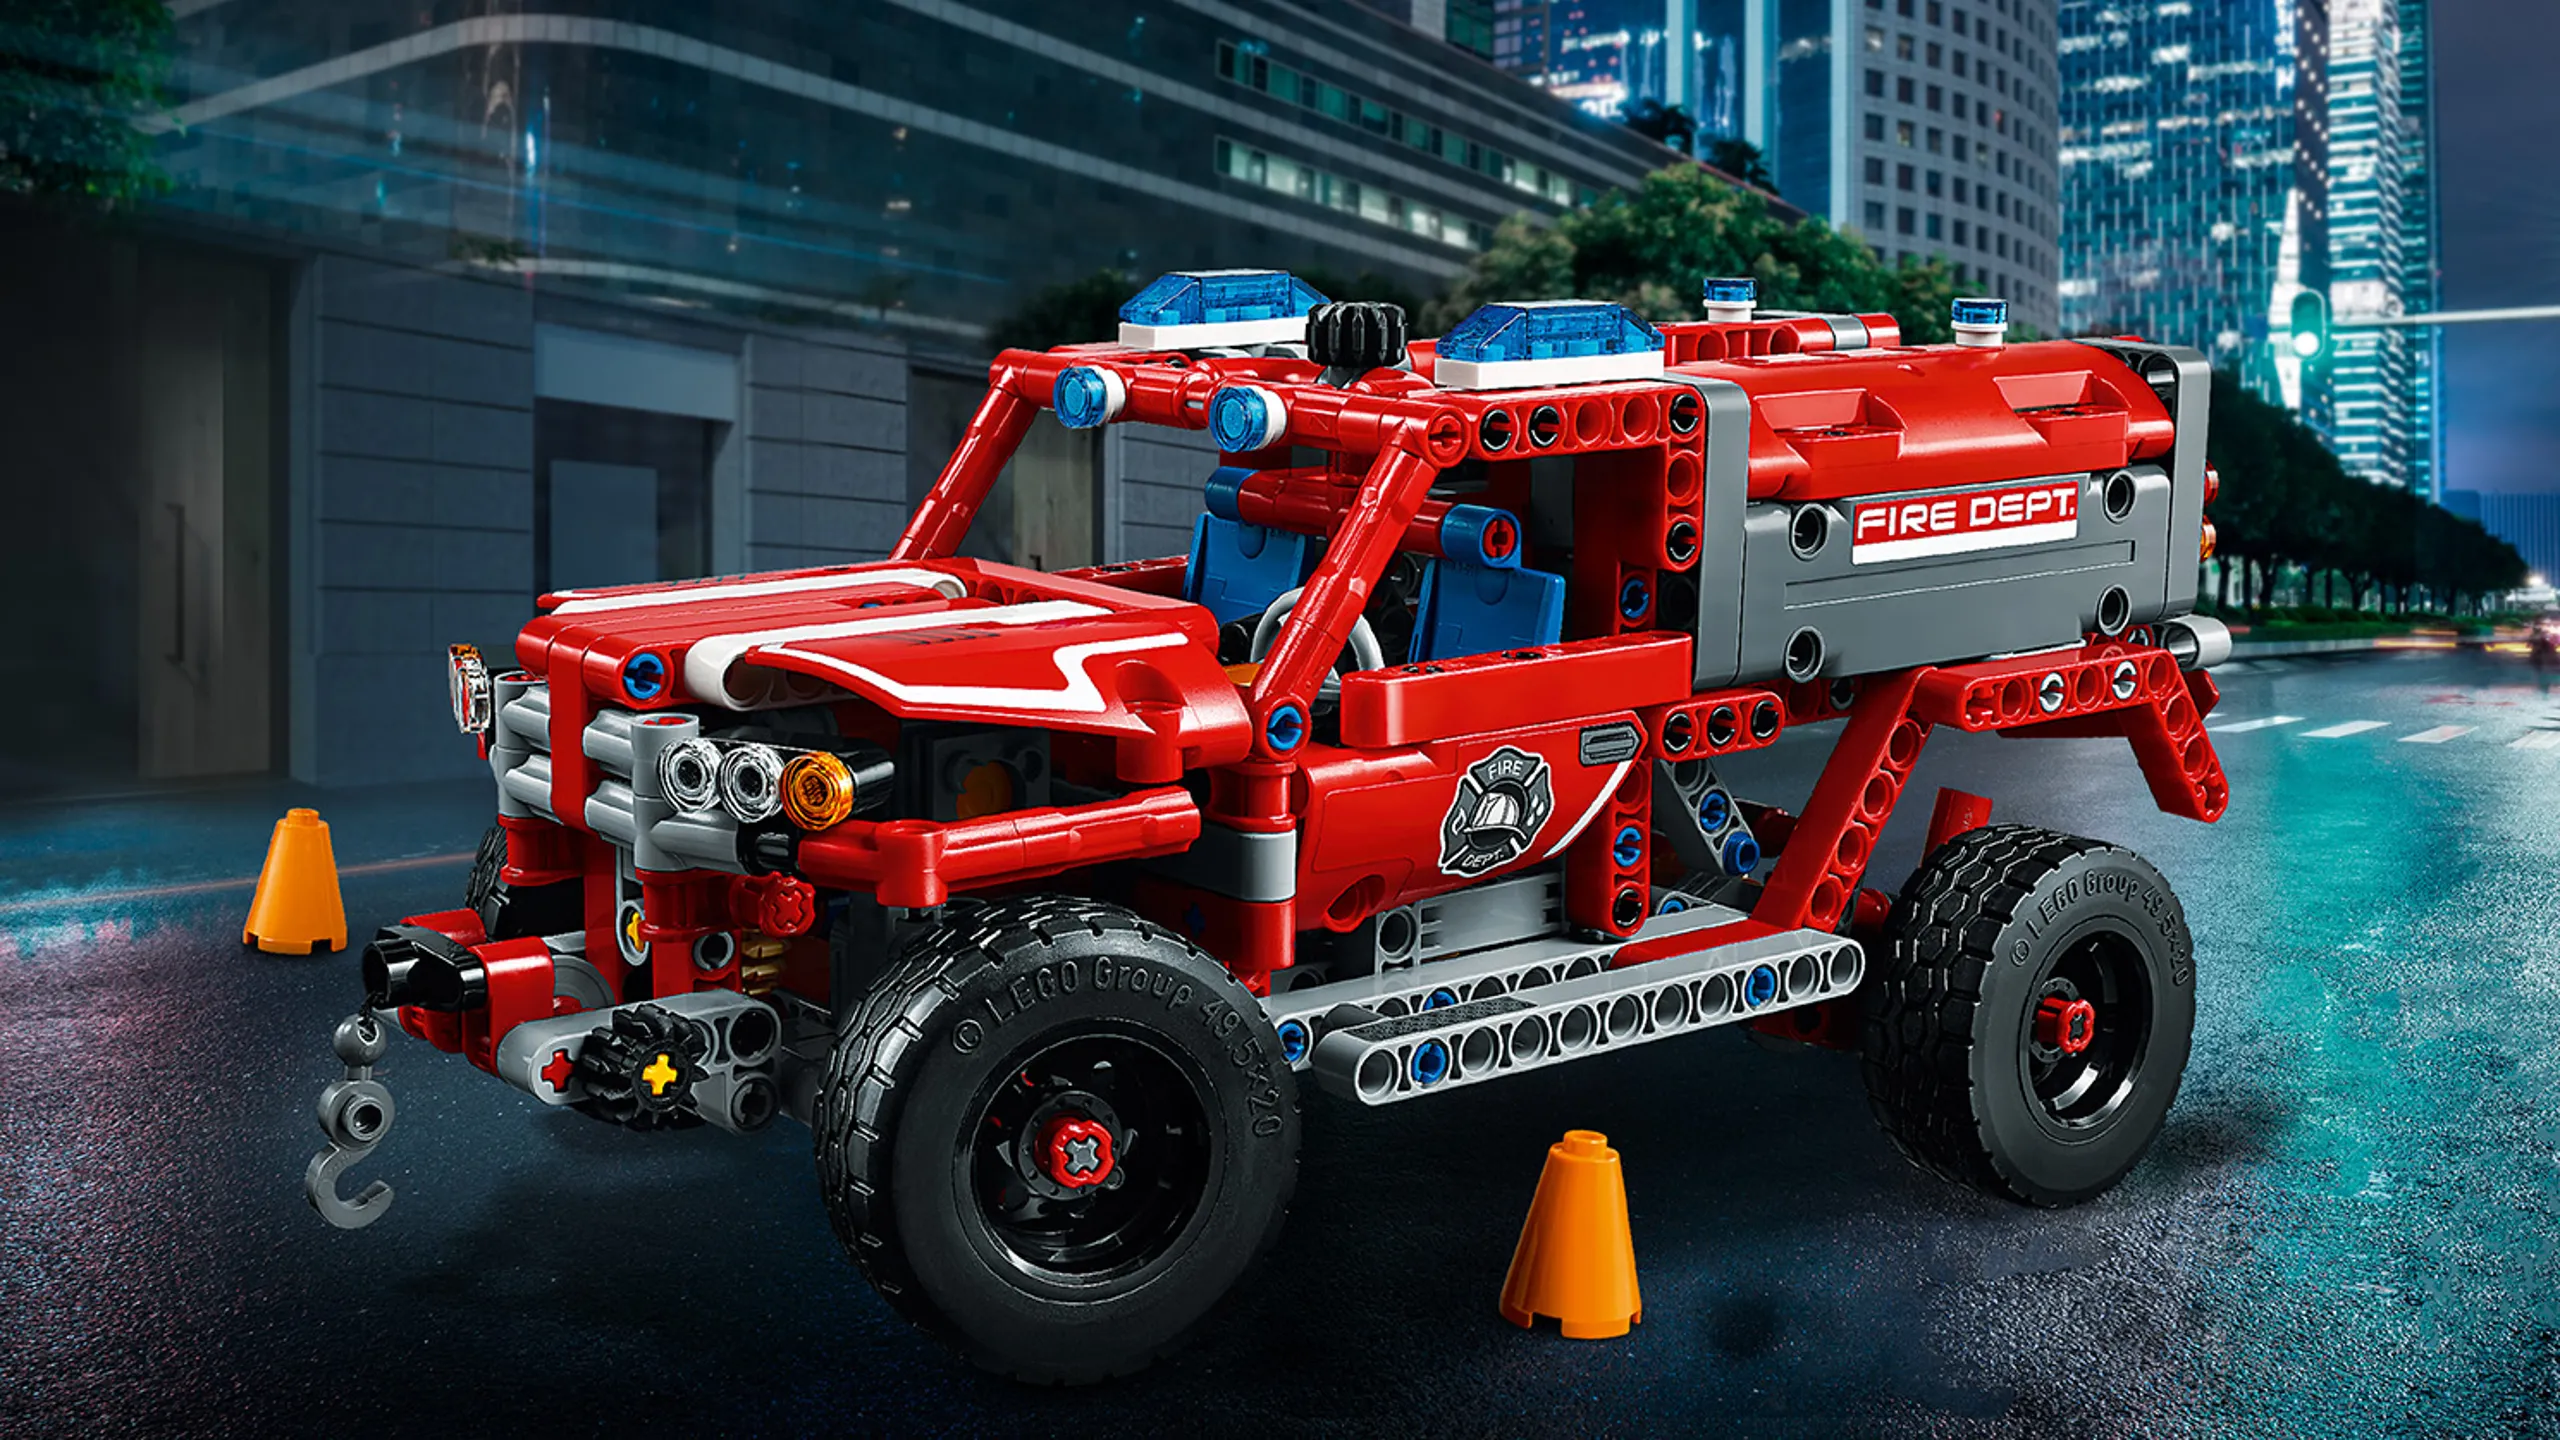 LEGO Technic - 42075 First Responder - This red, blue and white SUV has blue warning beacons, roof-mounted spot lamps, working steering and suspension, and wide black rims with chunky tires.